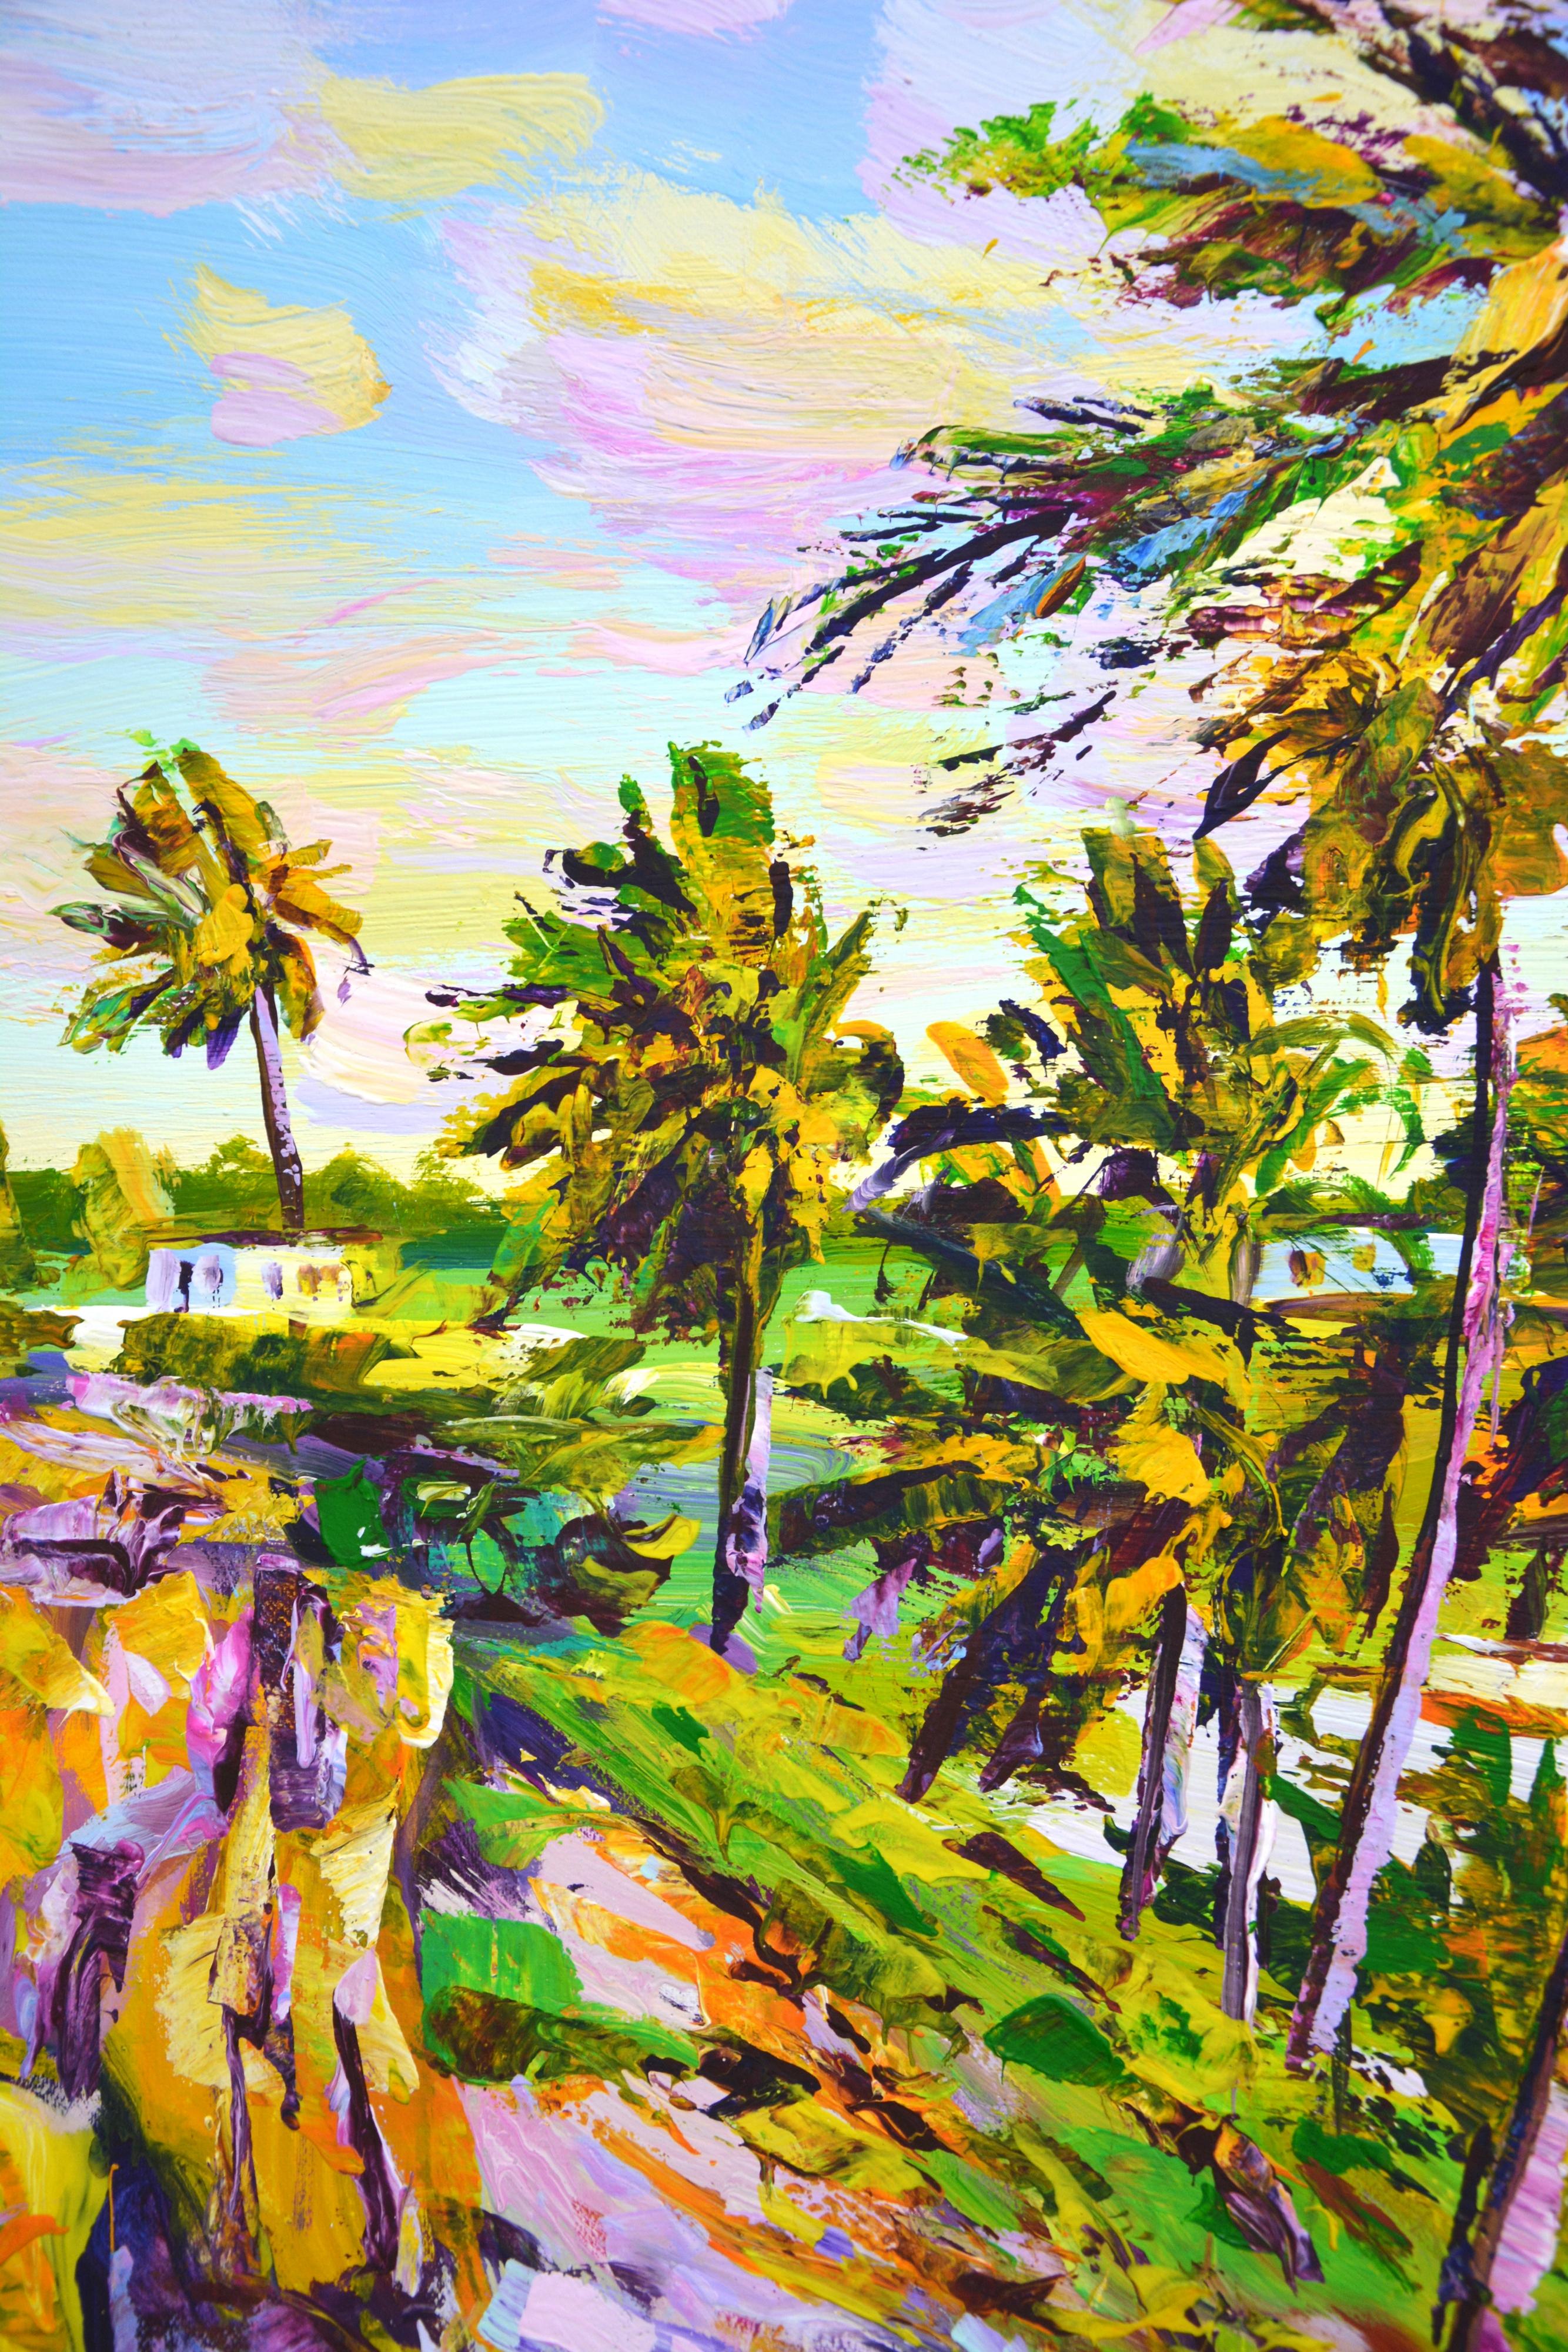 Sunny Beach. Ocean. Summer landscape: ocean, waves, sunny beach, palm trees, beach, sunny day, romance, impressionism, realism, water, painting, sea foam, sea wave, sea voyage, sky, create an atmosphere of relaxation. The painting is varnished.